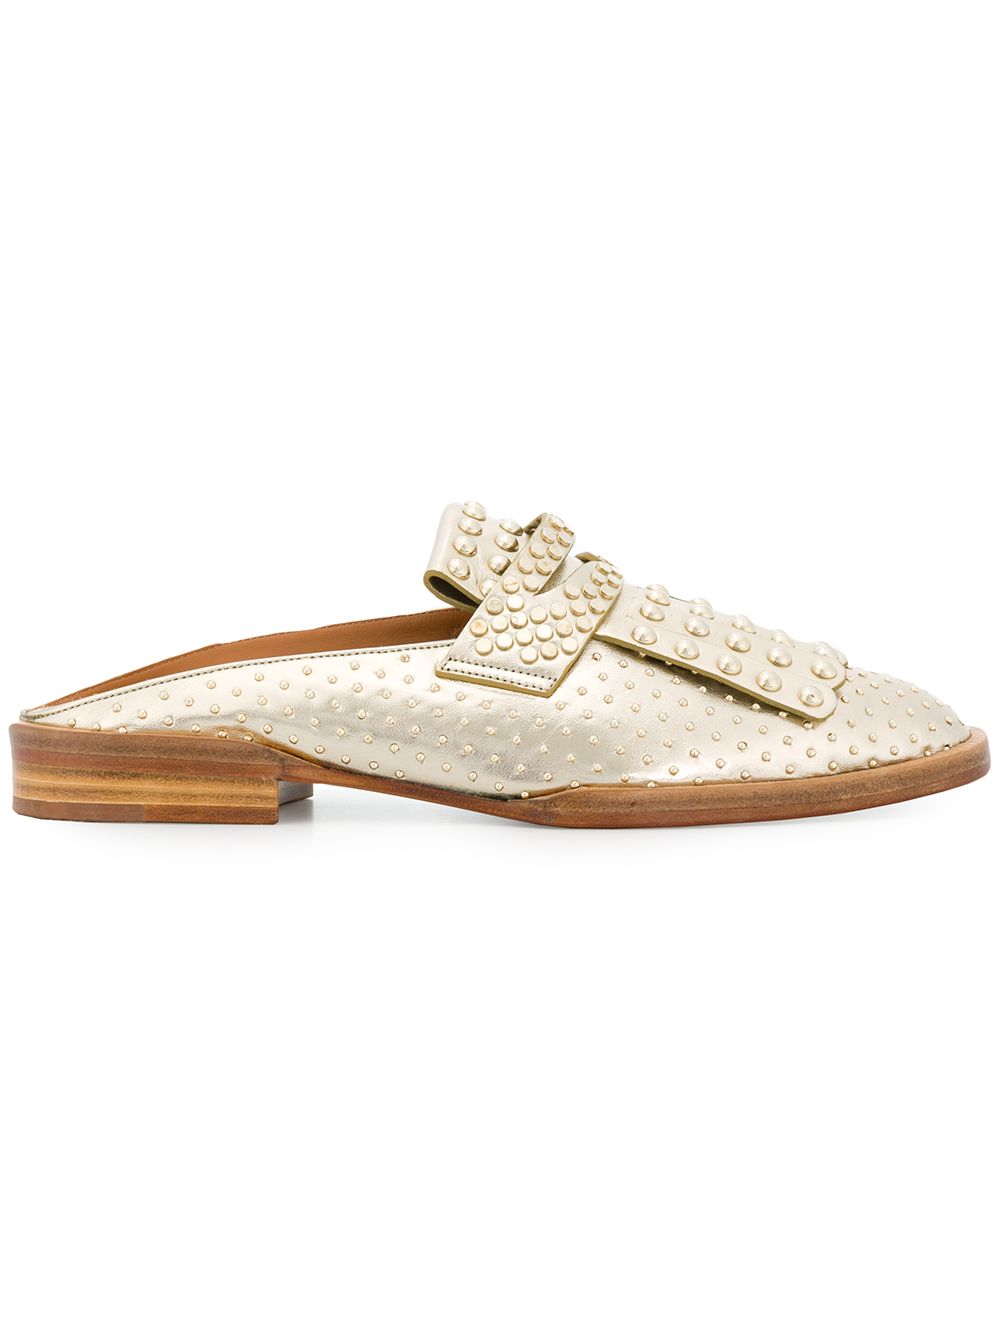 ROBERT CLERGERIE YOULA PEARL EMBELLISHED MULES,YOULA12917896